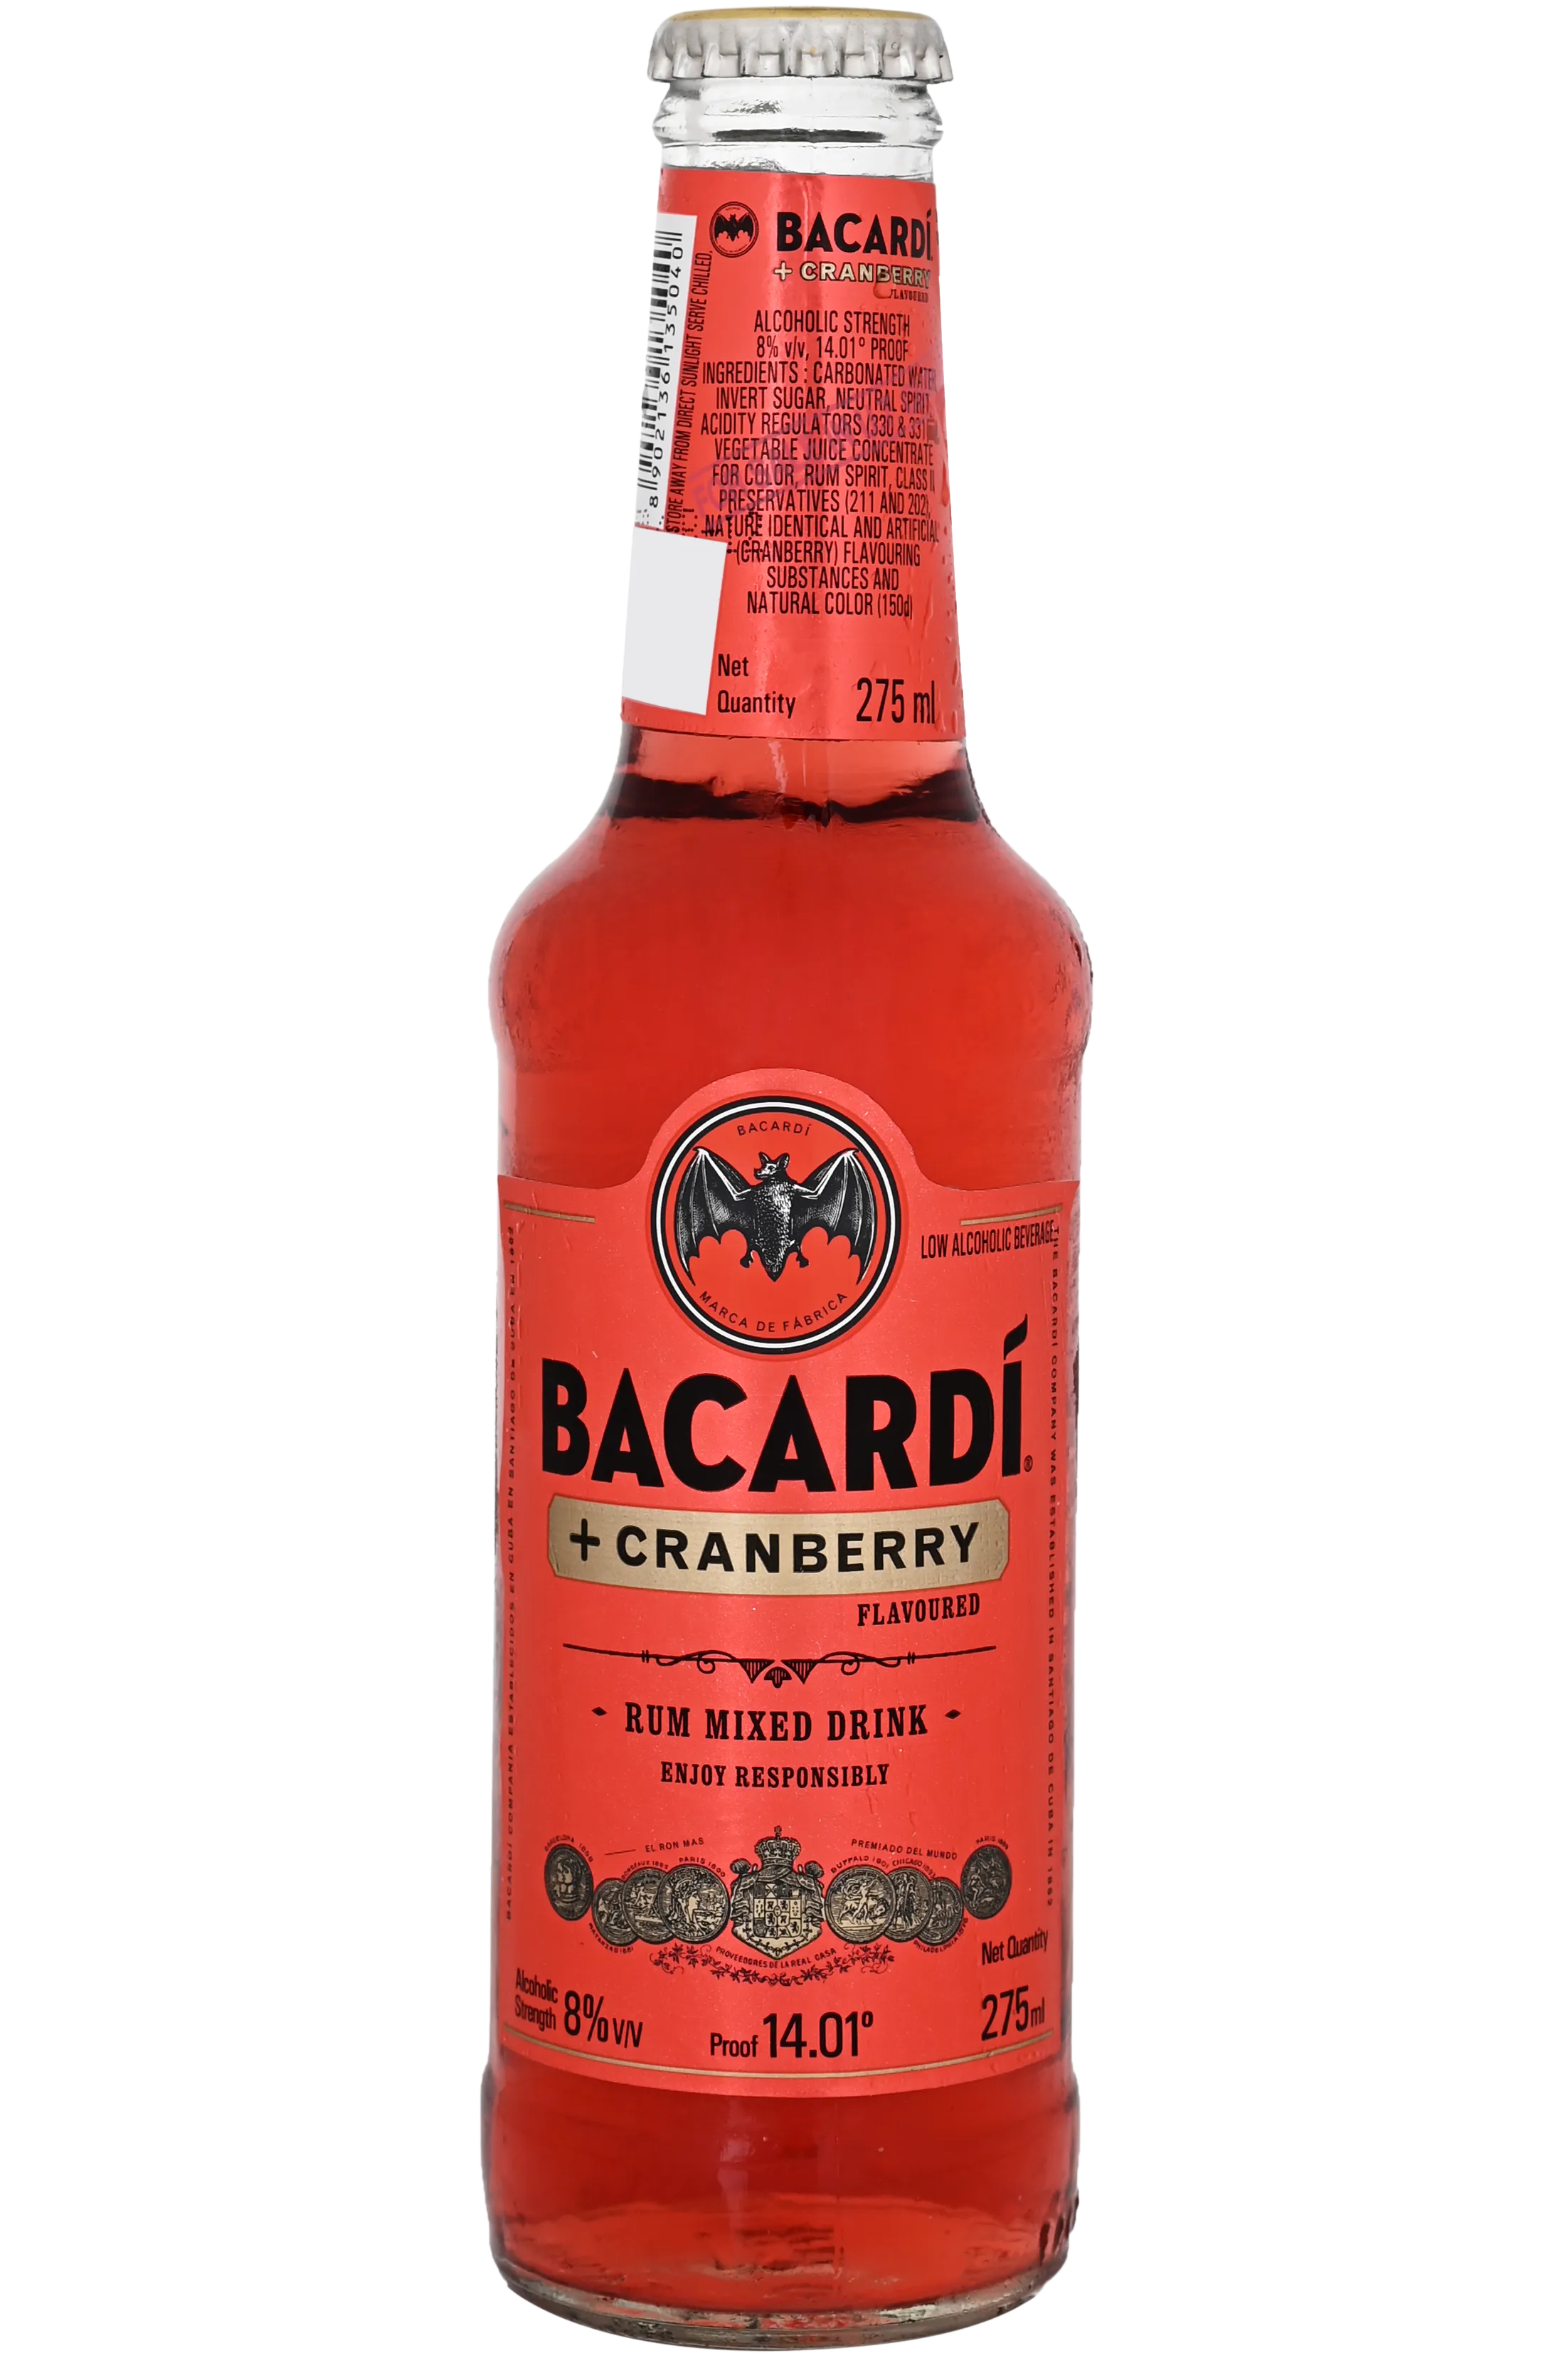 Buy Bacardi Cranberry Flavoured Rum Available in 275 ml